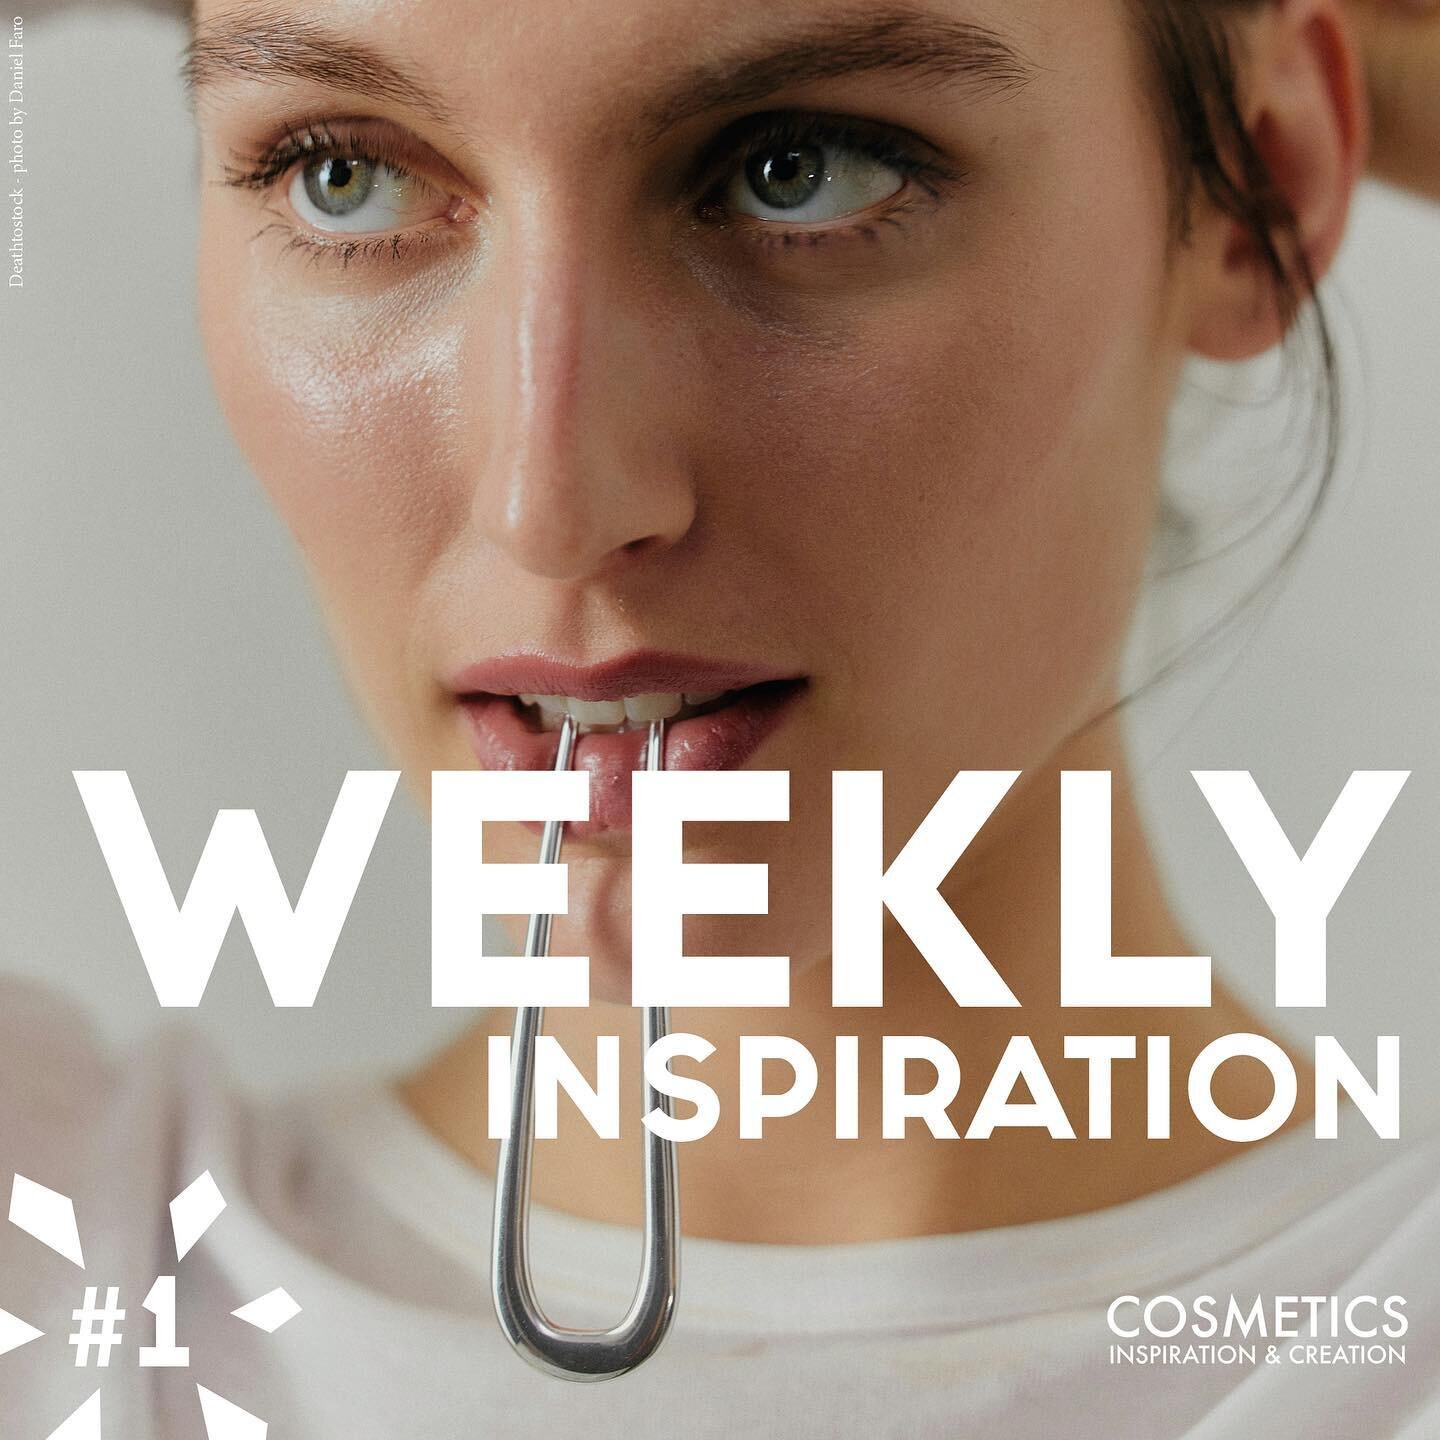 Every week, the CIC team introduces a new format: our Weekly Inspiration - where we dive into what&rsquo;s happening in the beauty scene. Find us on Twitter, LinkedIn &amp; TikTok to be updated on all the inspiring news.

Rapper @nickiminaj has teame